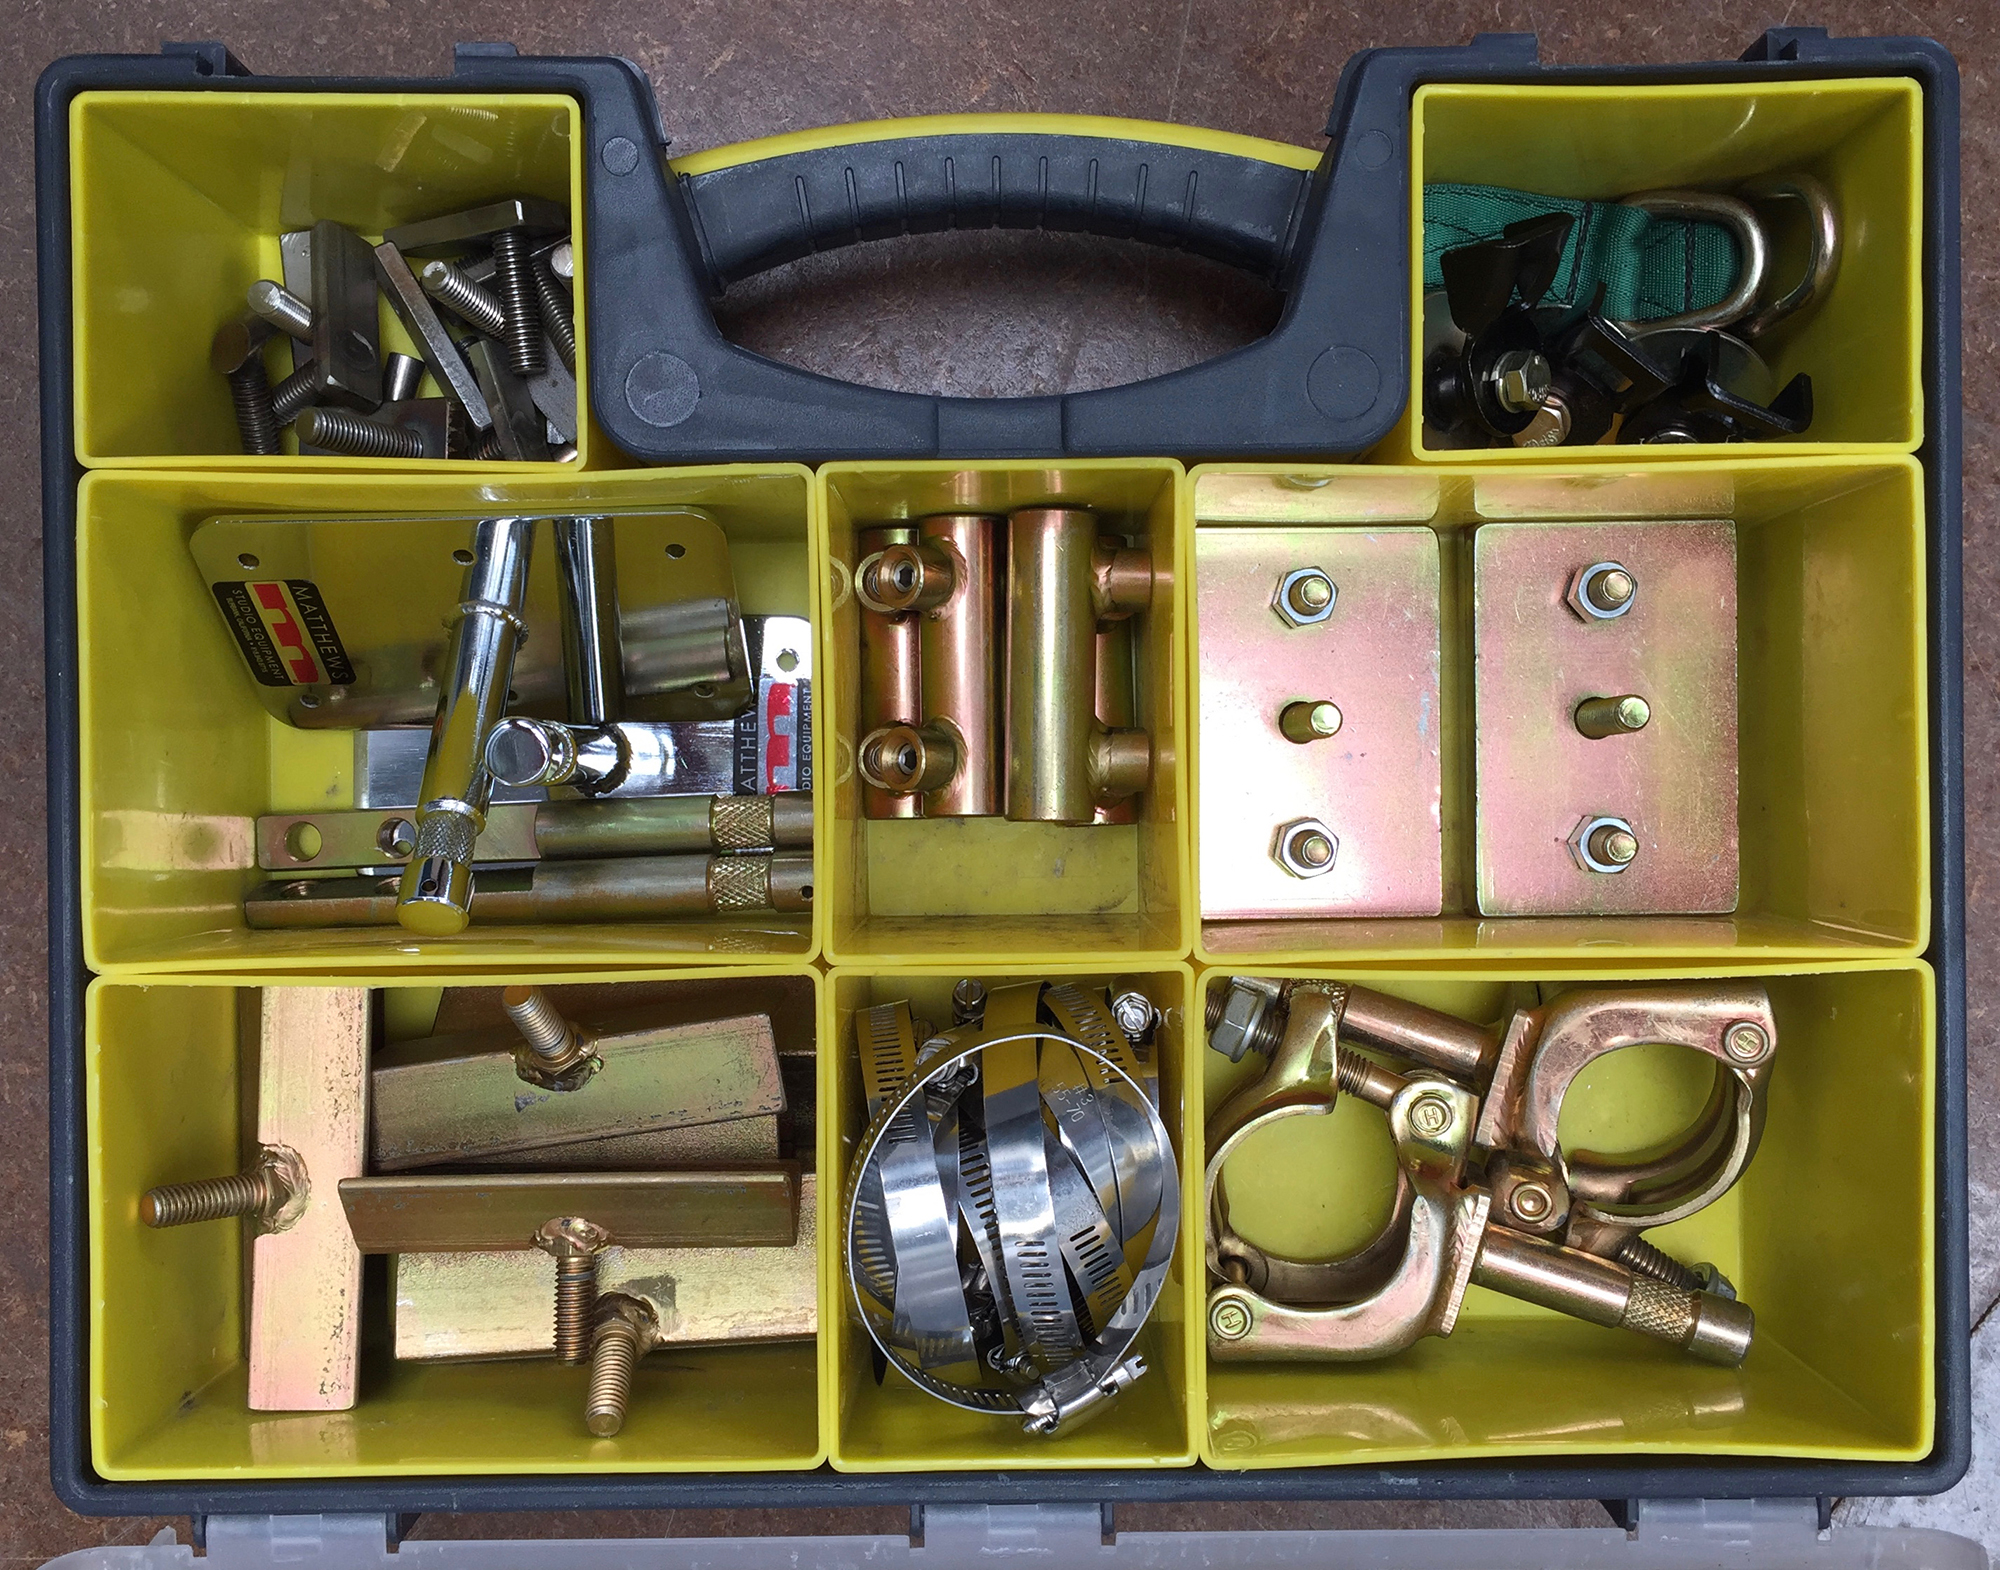 Includes bicycle starters, body starters, grid clamps, pinch weld clamps, baby plates etc